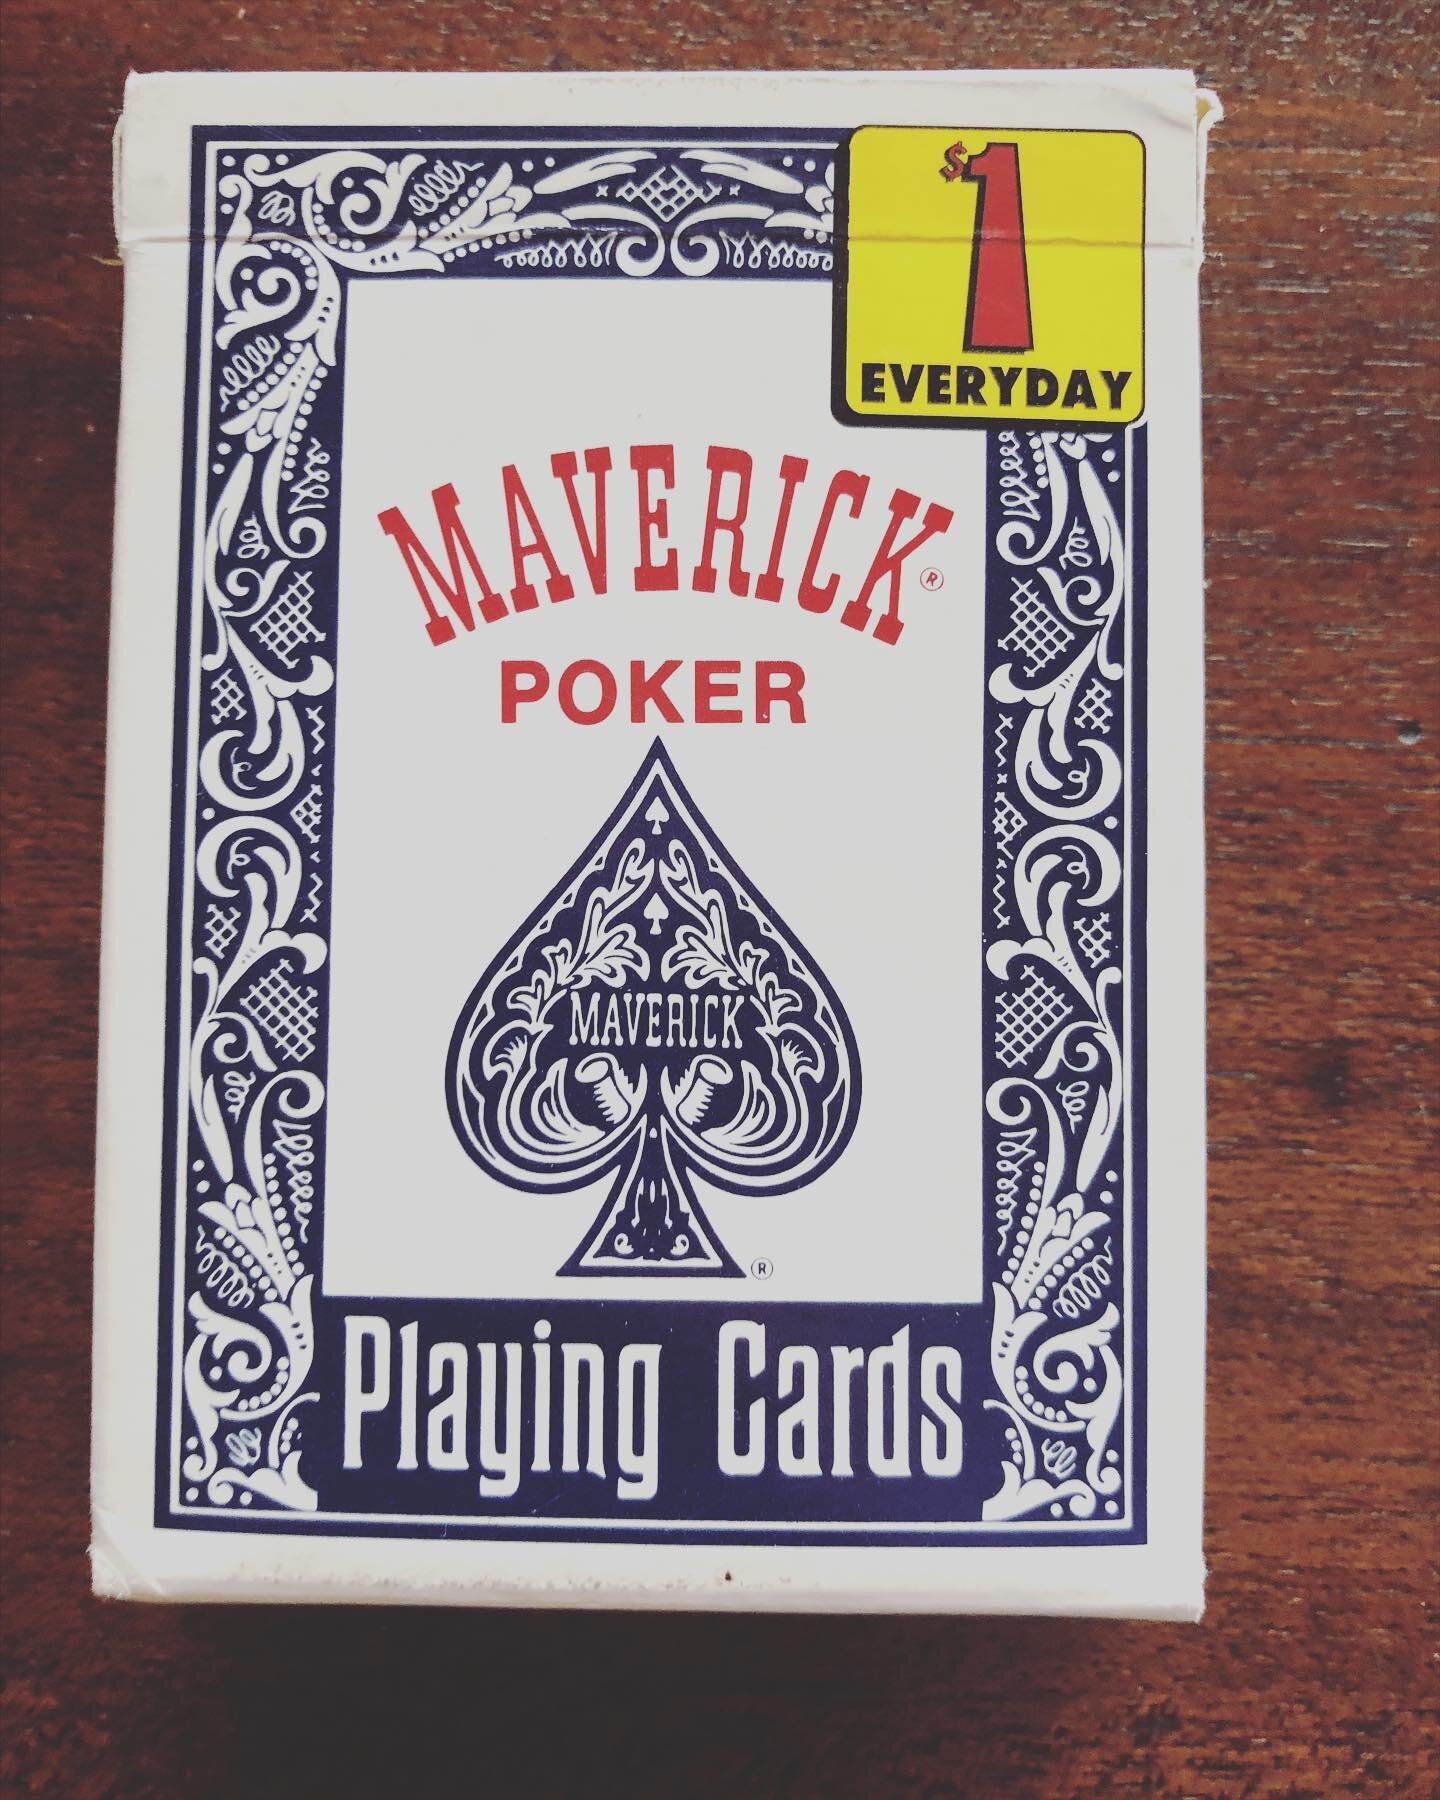 Maverick playing cards #playingcards #cards #cardgames #games #poker #blackjack #texasholdem #casino #ungratefulgranddaughter 

#forsale #garagesale #fleamarket #selling #stuff #secondhand #reuse #reduce #recycle #upcycle #connecticut #grandma #grand